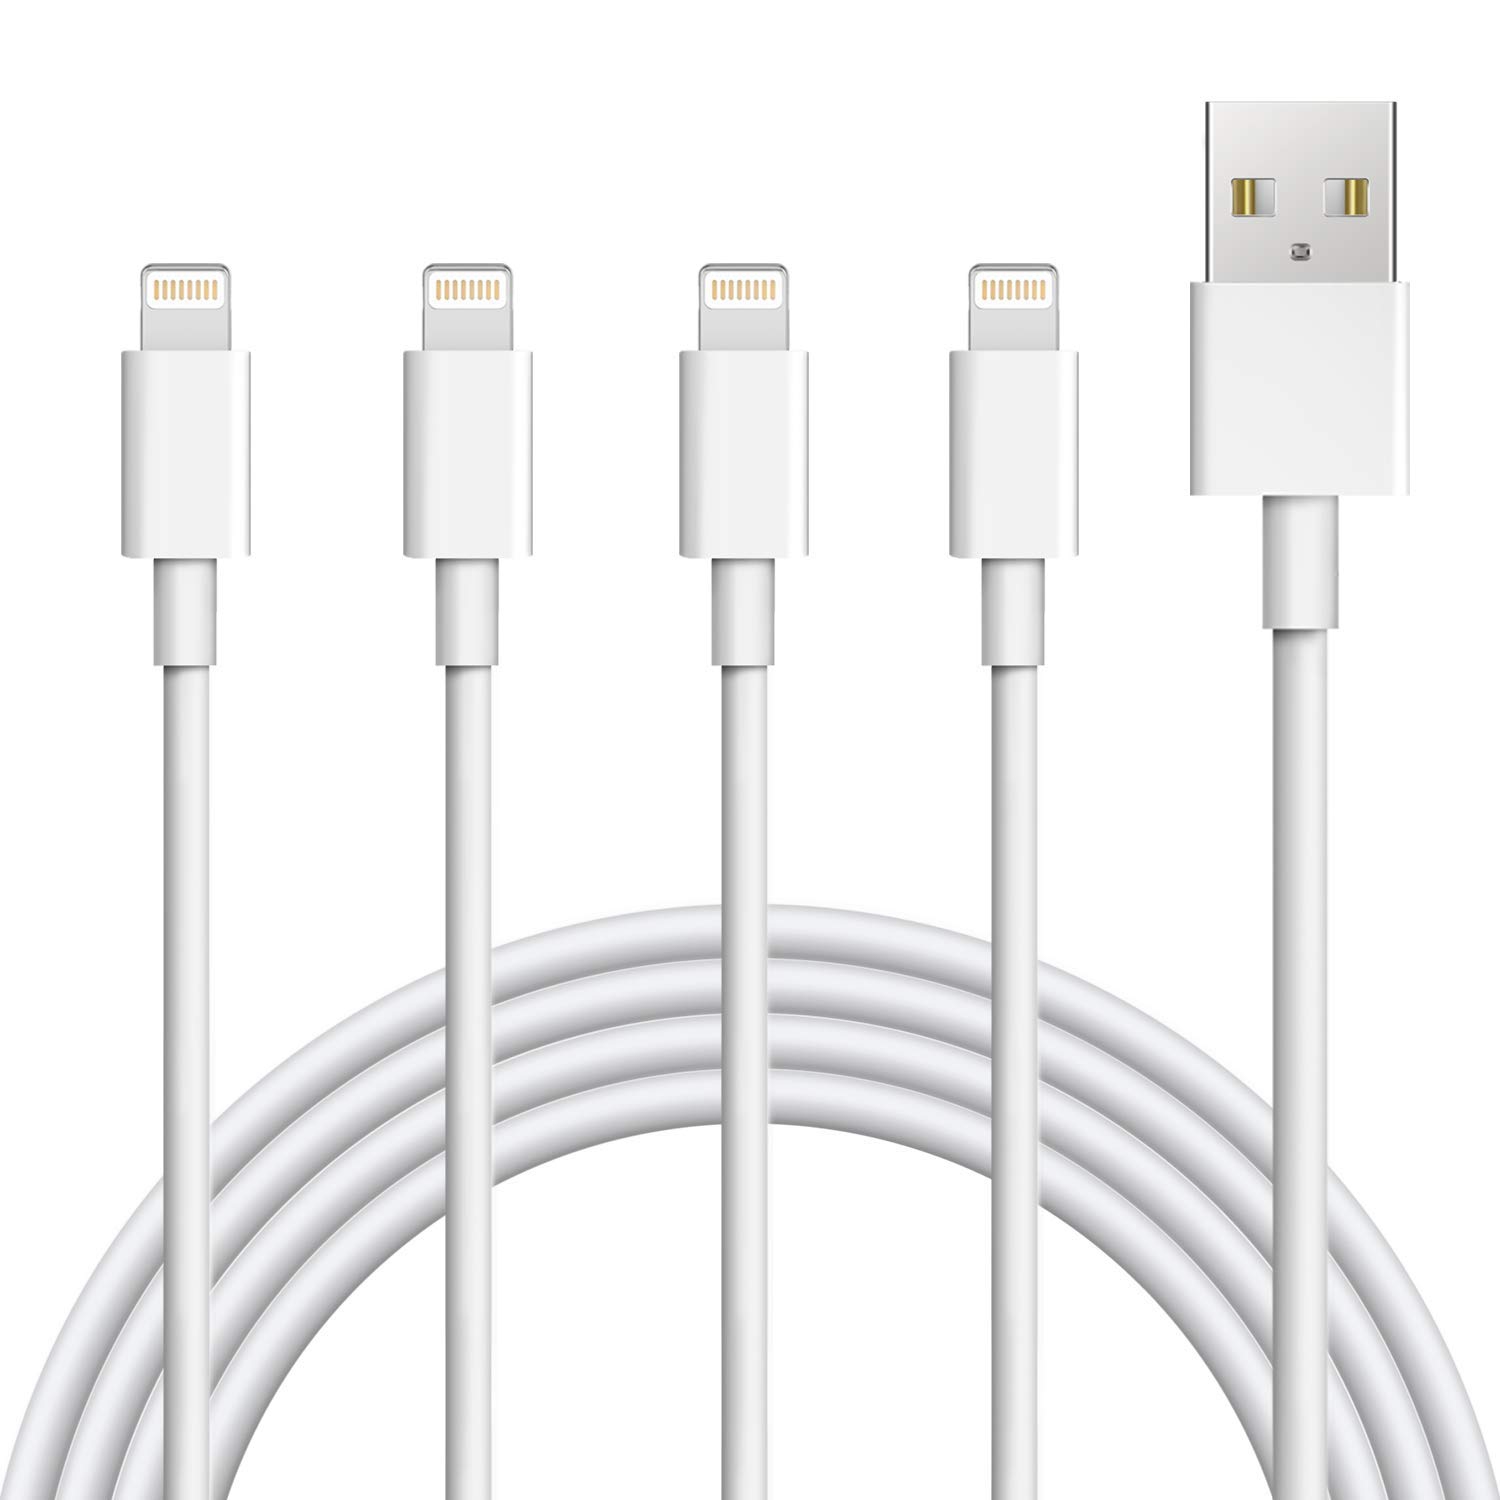 (4PK)[Apple MFi Certified] iPhone/iPad Charging/Charger Cord Lightening to USB Cable Fast Charging and Syncing for iPads,iPods and iPhone X/8/7/6s/6/plus/5s/5c/SE (FREE SHIPPING)